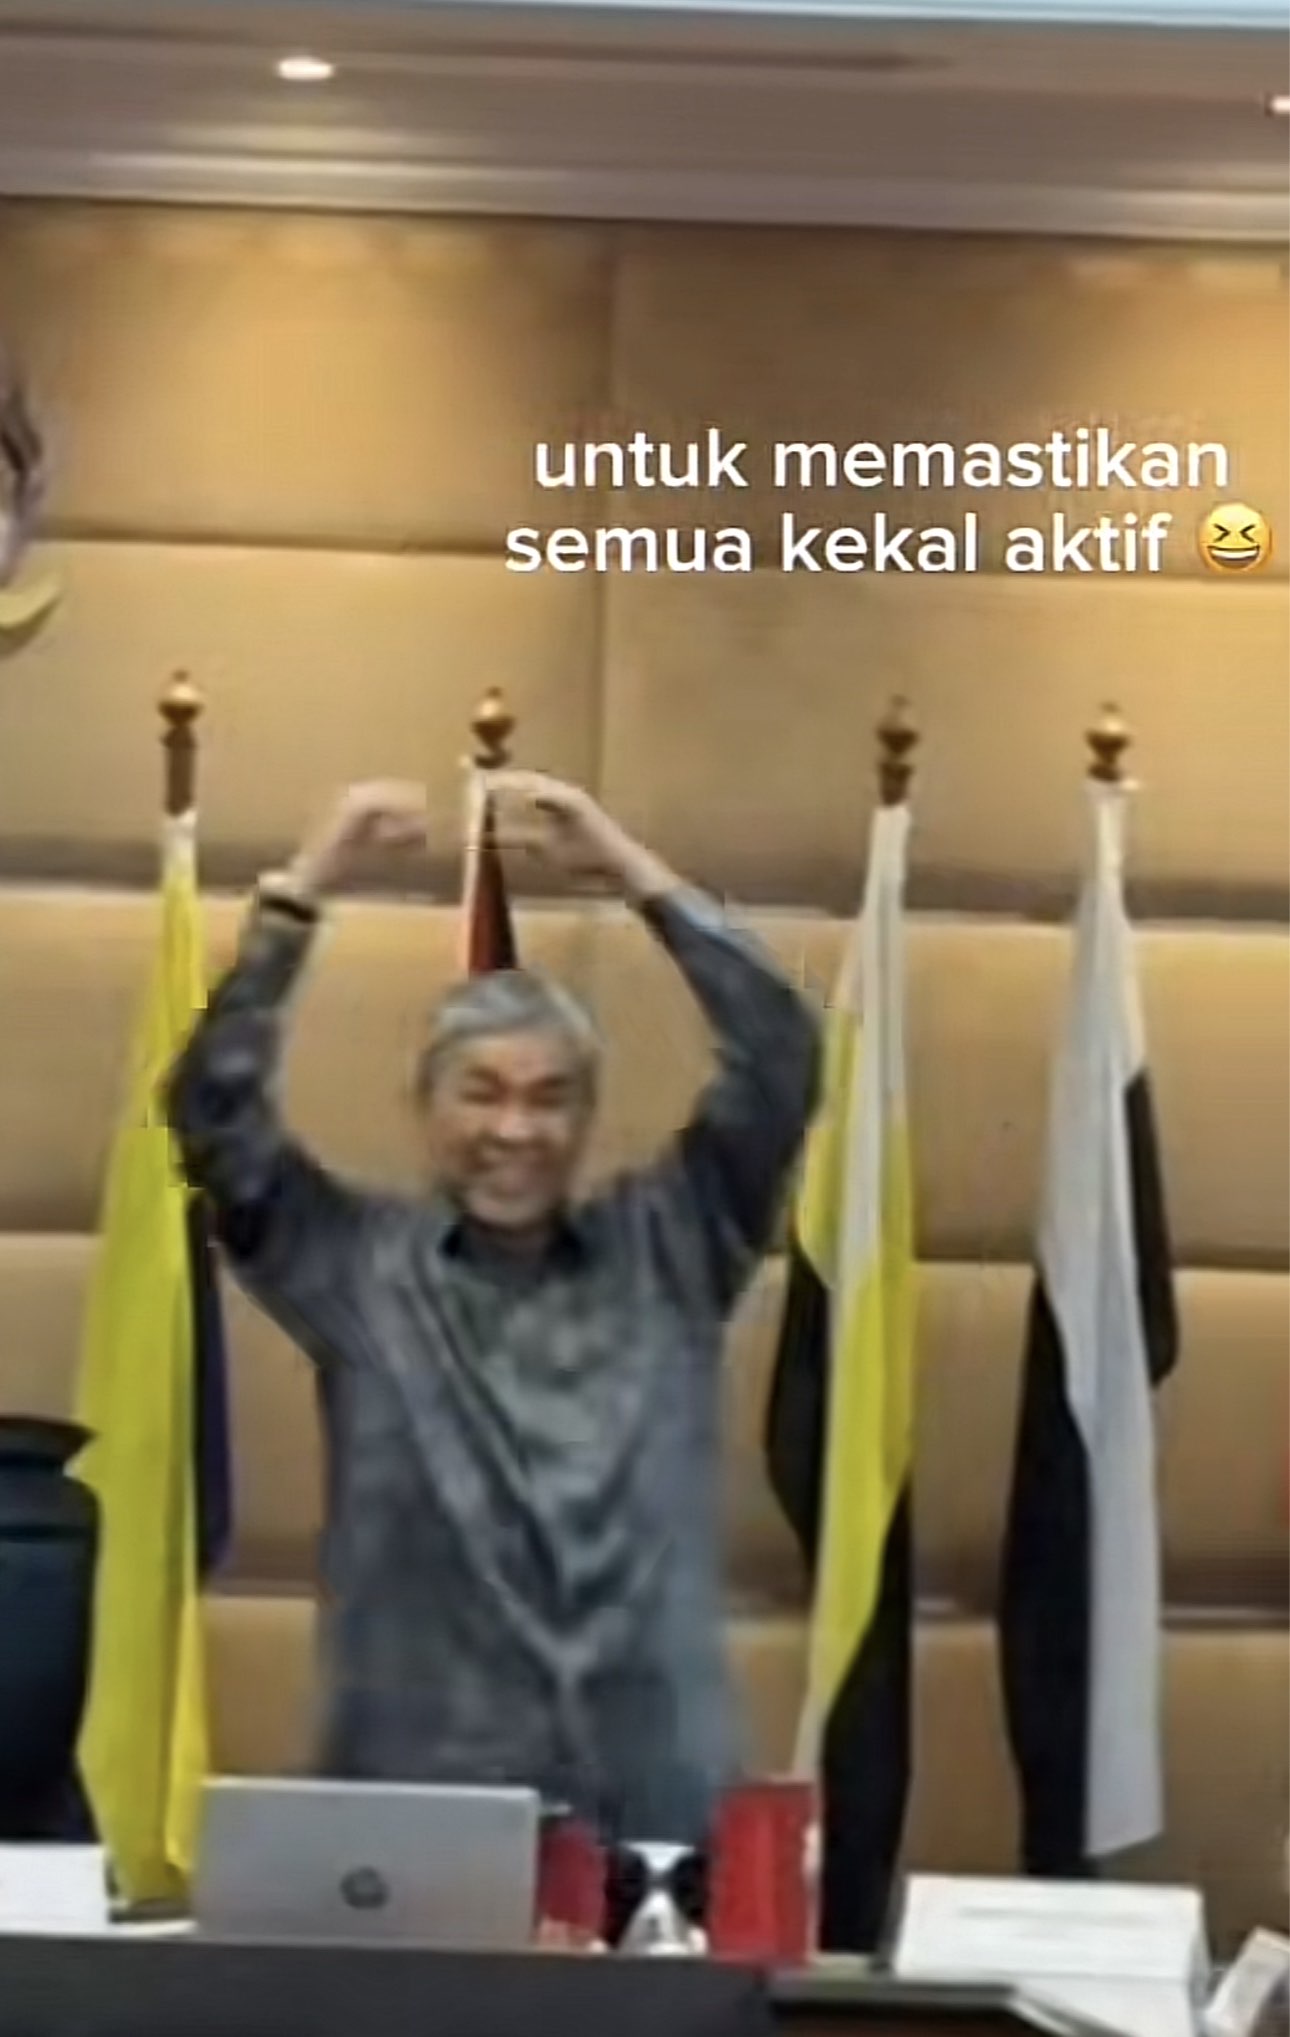 Zahid dancing forming a heart using his hands